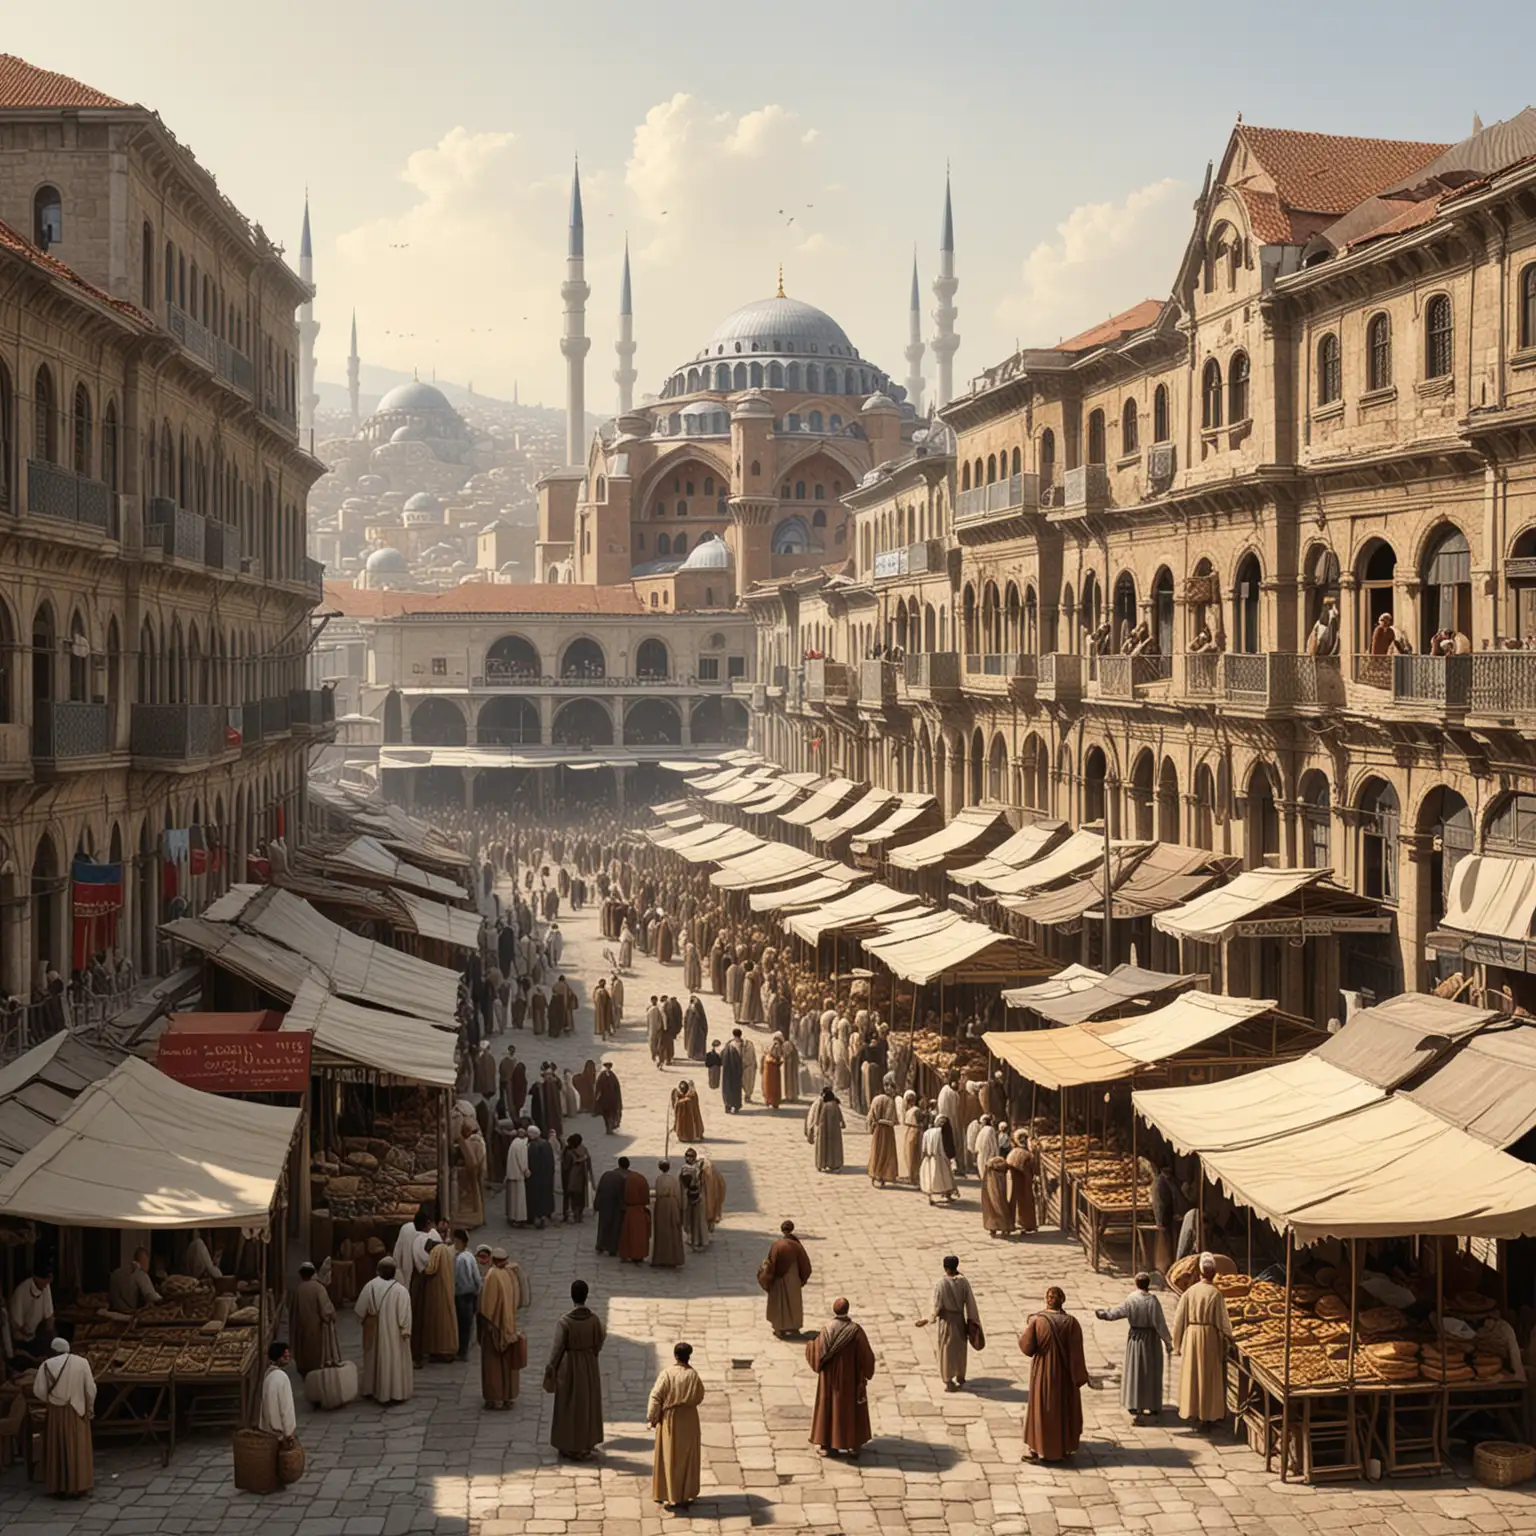 Byzantine Era Public Marketplace in Istanbul with Architectural Splendor and Bustling Shoppers